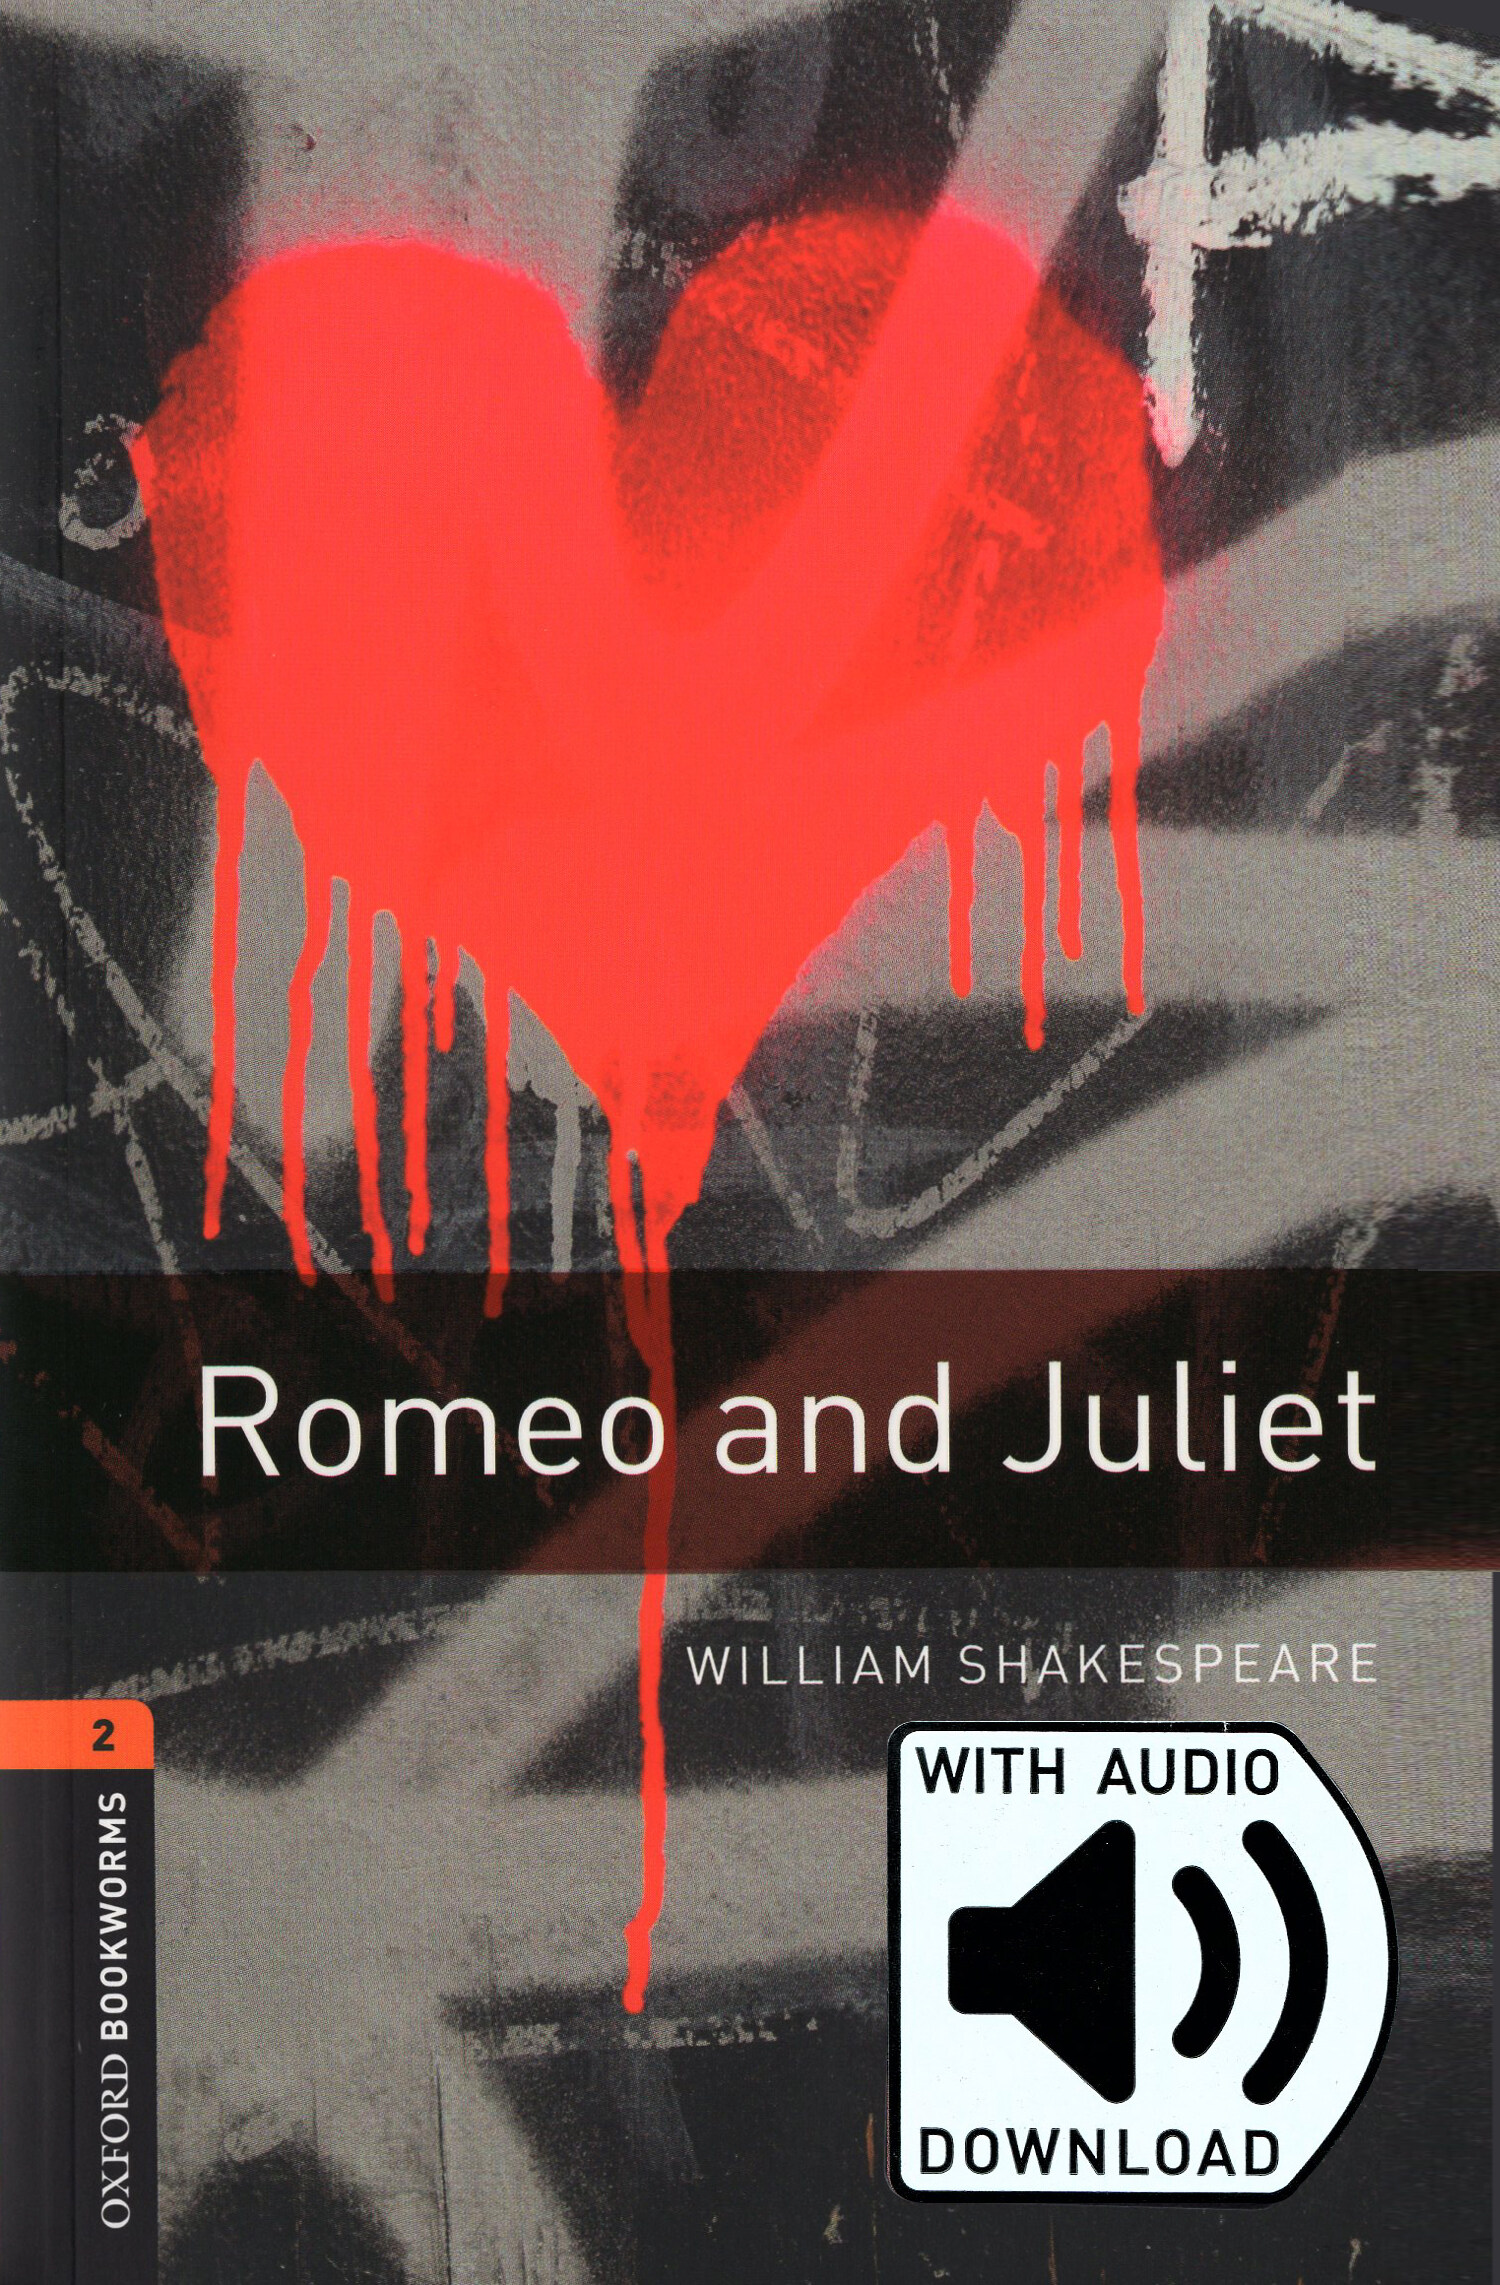 Oxford Bookworms Library Playscripts 2 : Romeo and Juliet (Paperback + MP3 download, 3rd Edition)